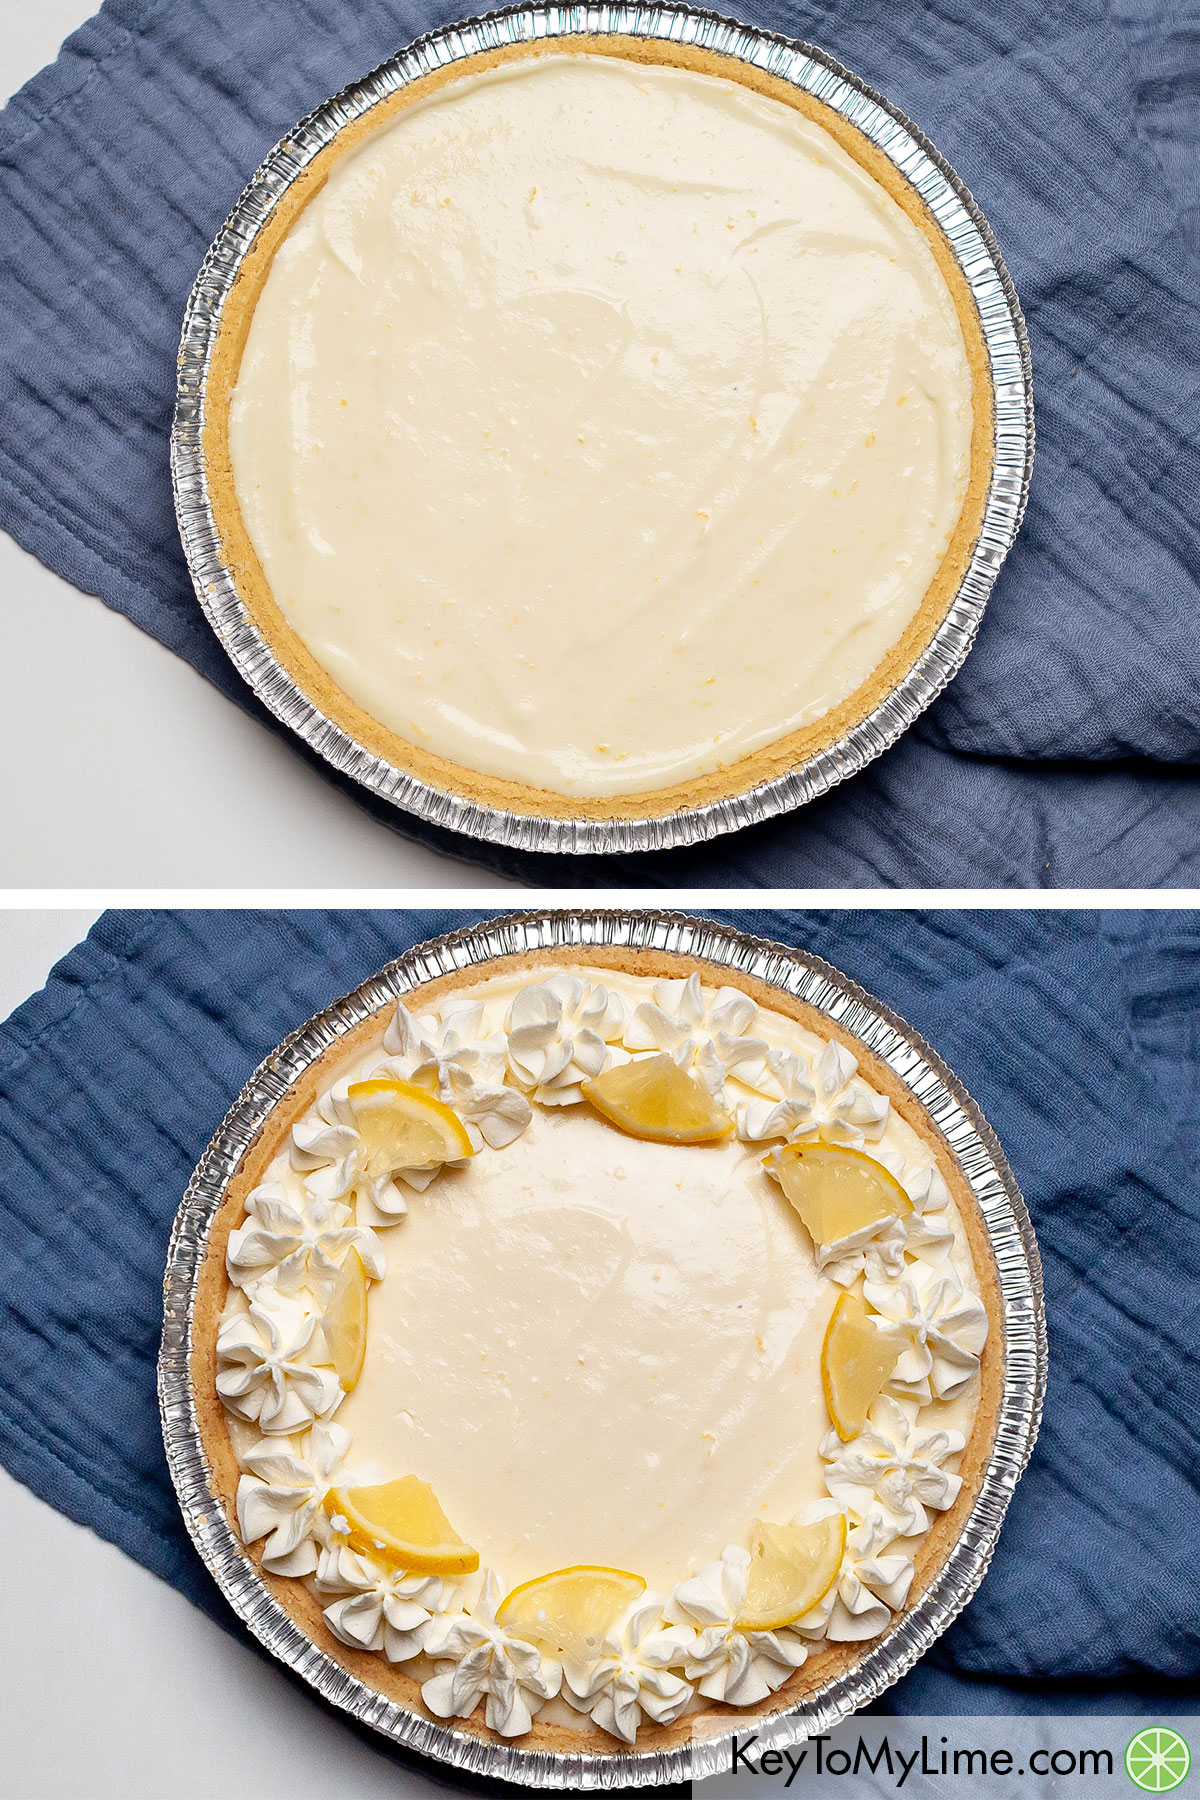 After the pie has set adding fresh whipped cream and cut lemon wedges to the pie.